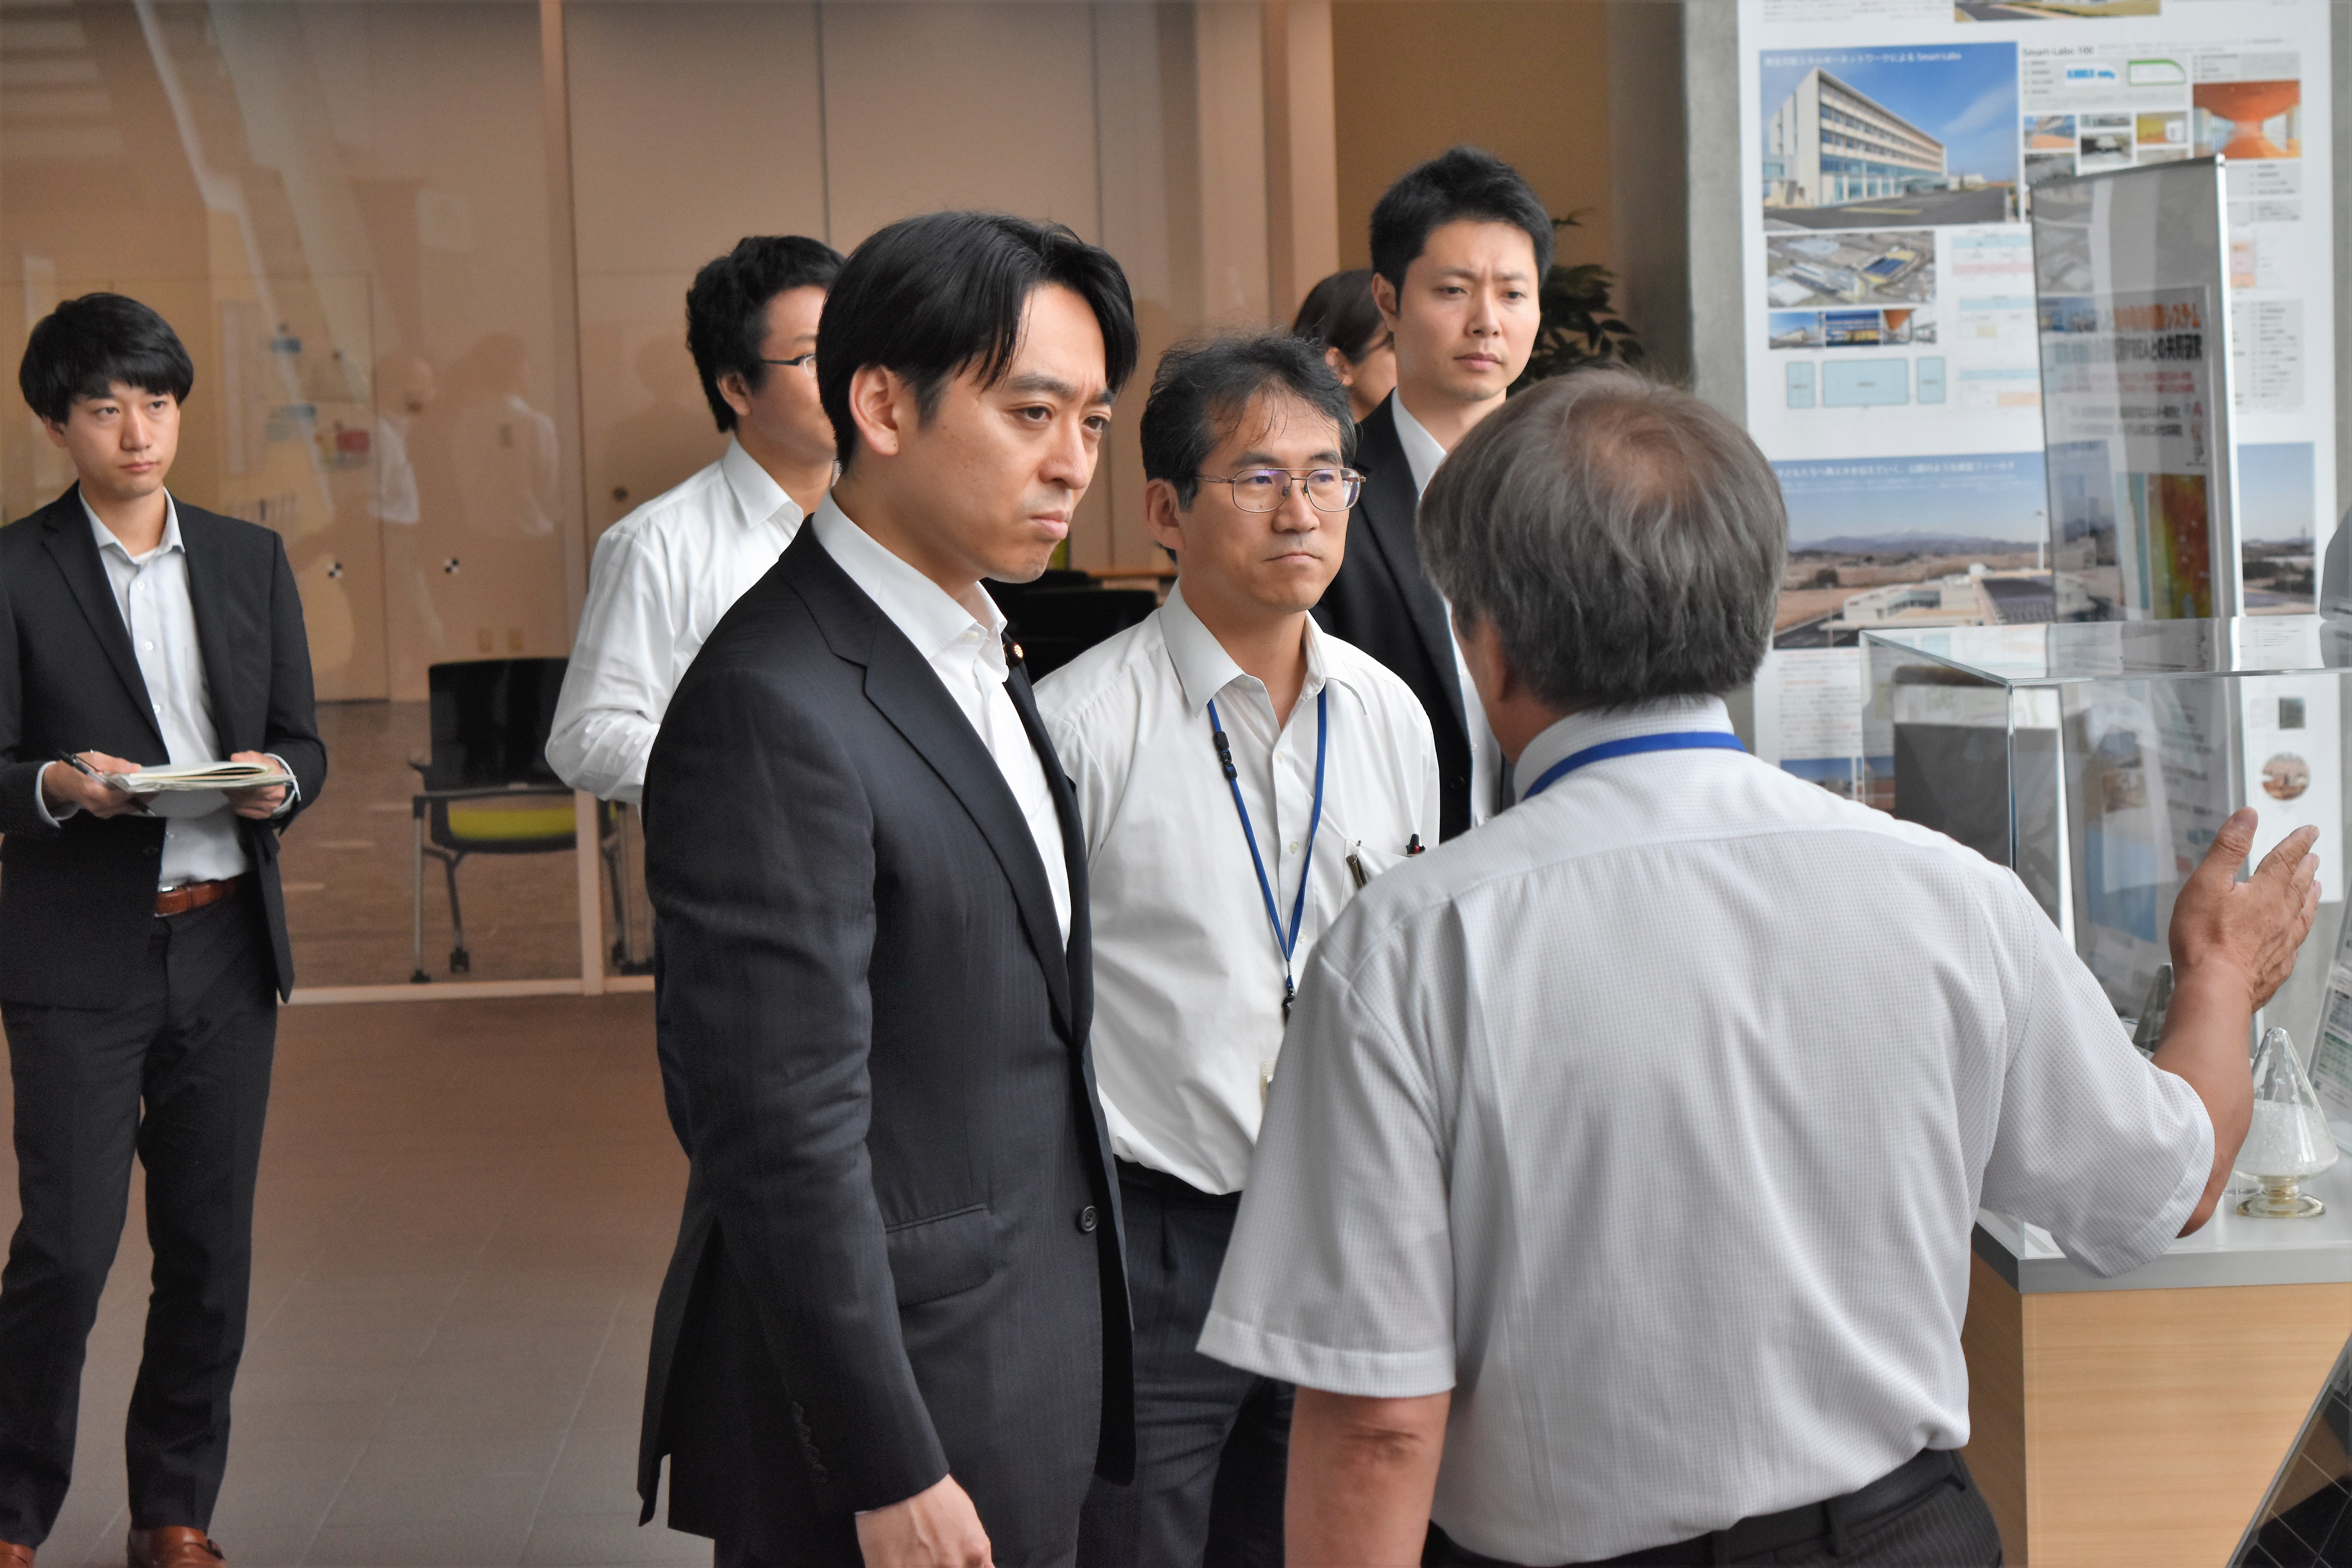 Parliamentary Vice-Minister Hiraki (center) listening to an explanation of a product developed by a local company.